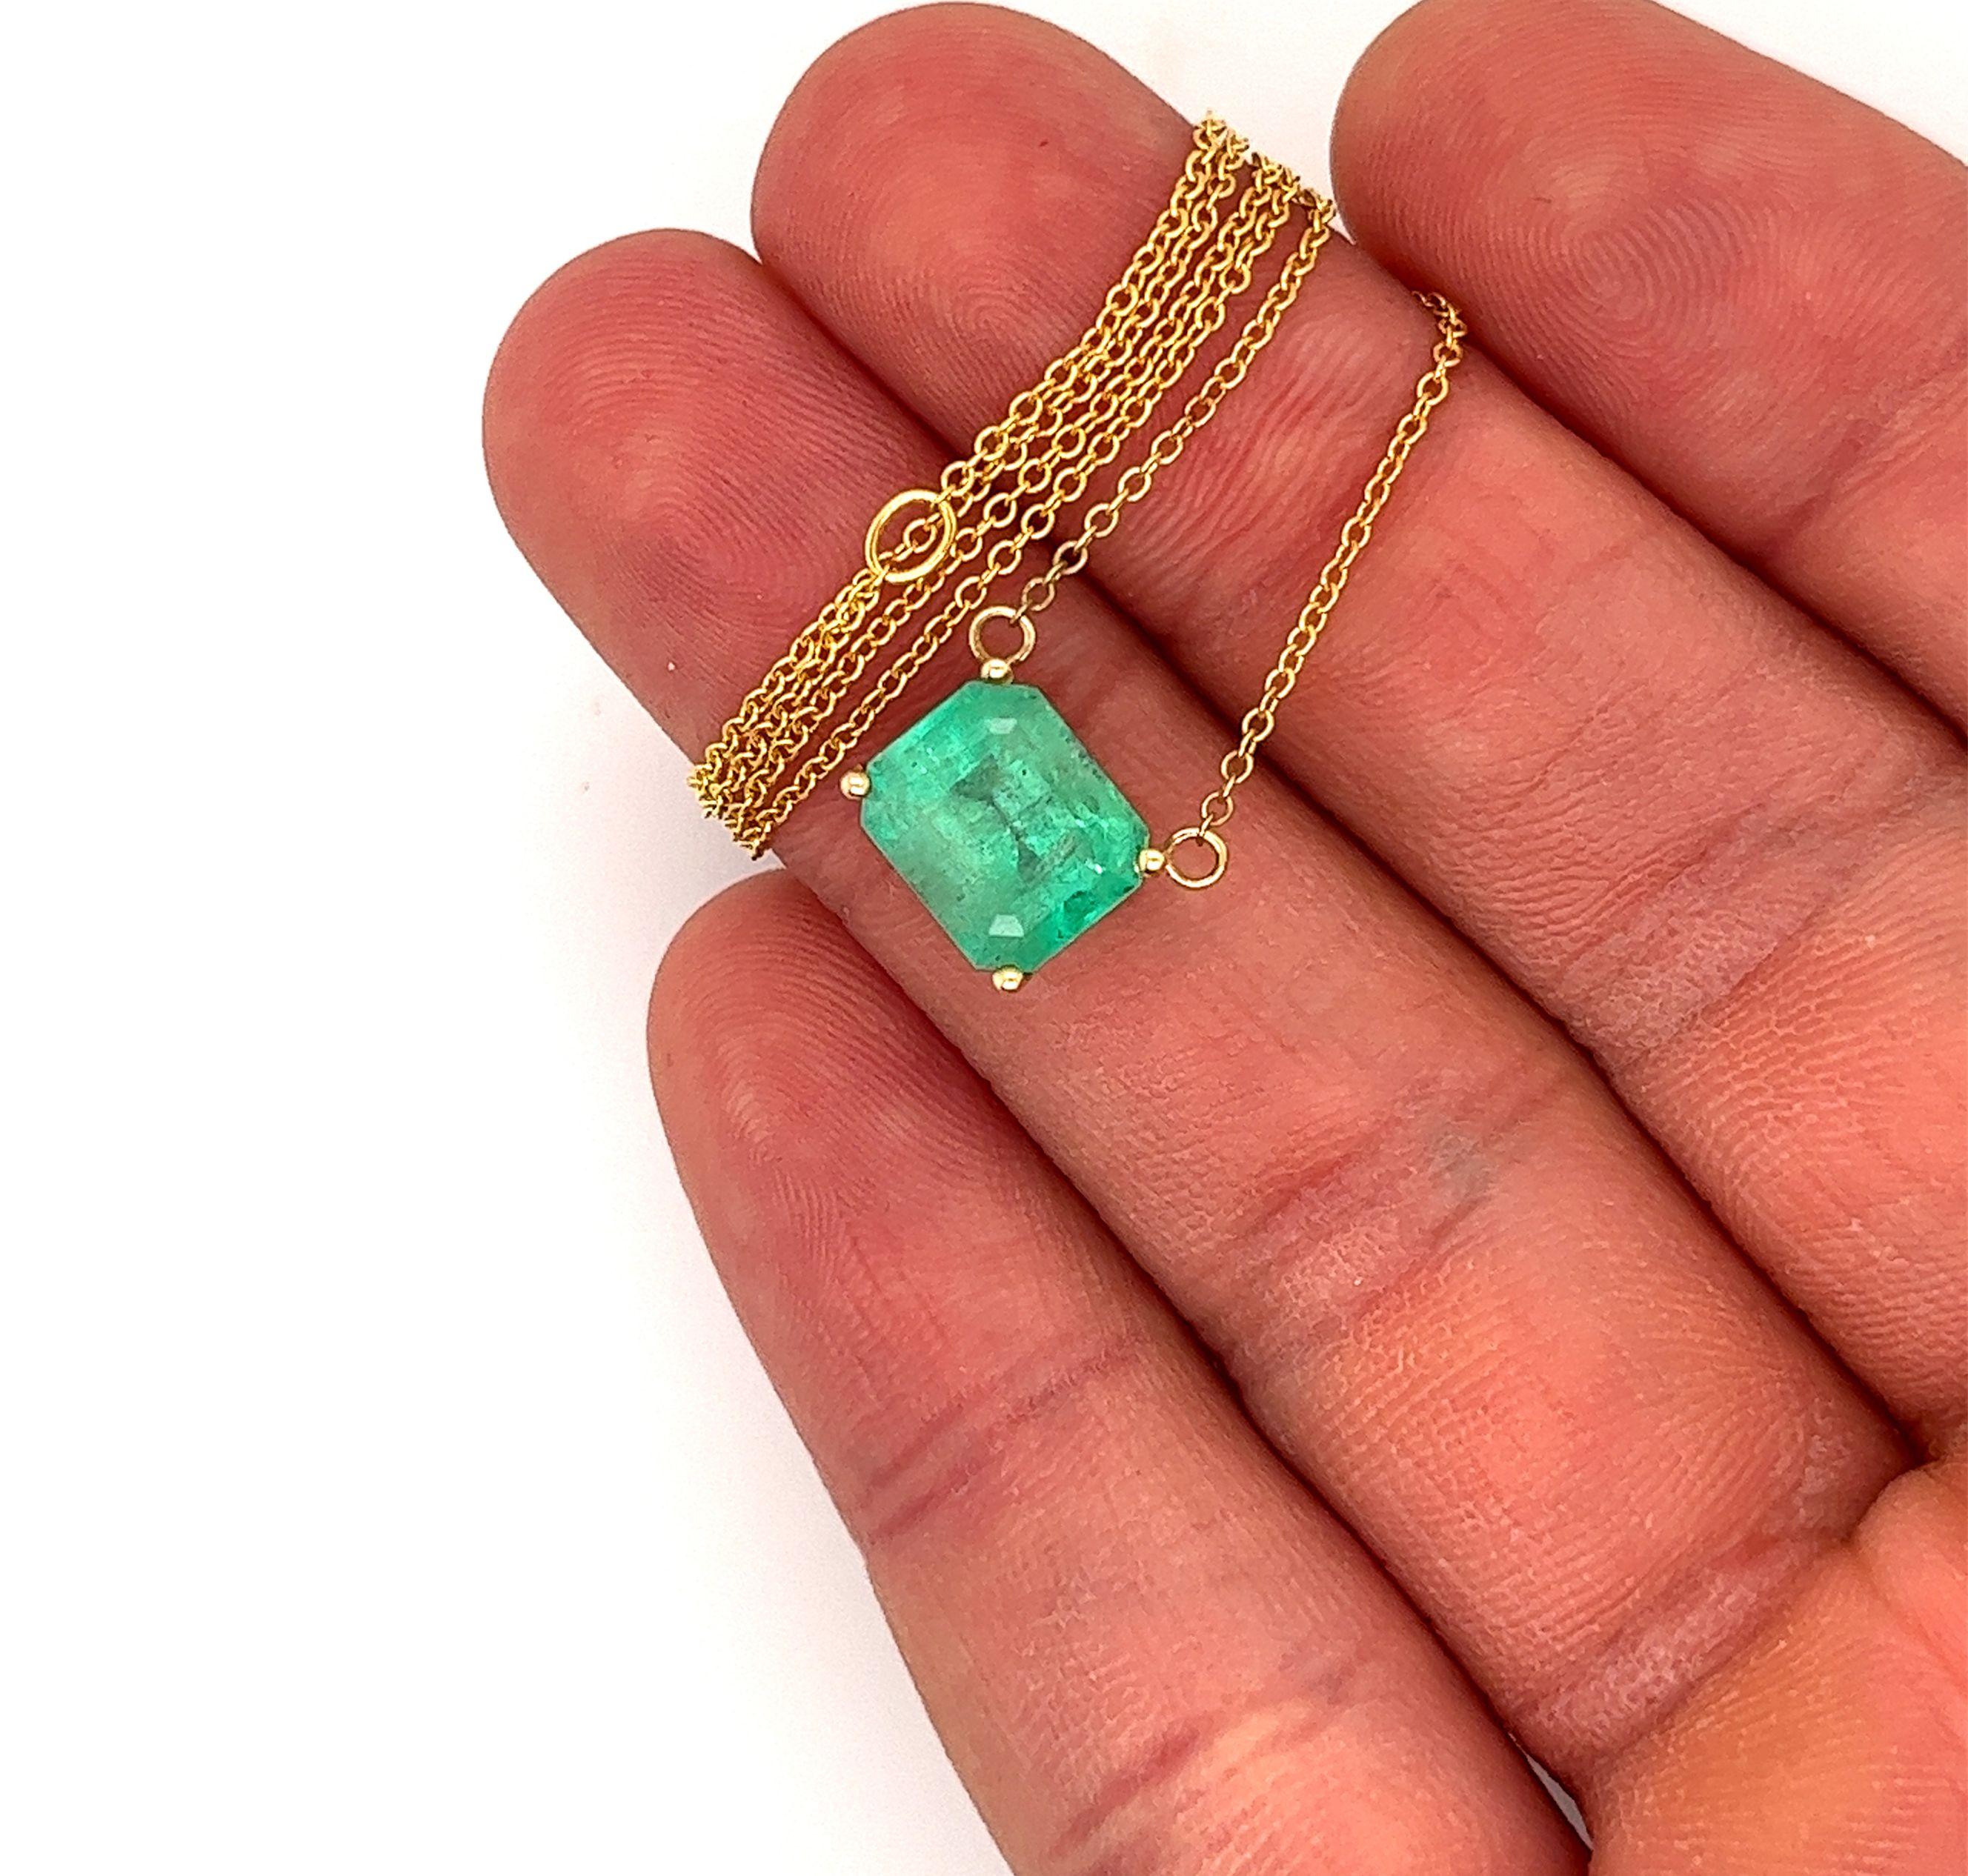 3.6 Carat Colombian Emerald Solitaire East West Pendant Necklace in 14K Gold In New Condition For Sale In Miami, FL